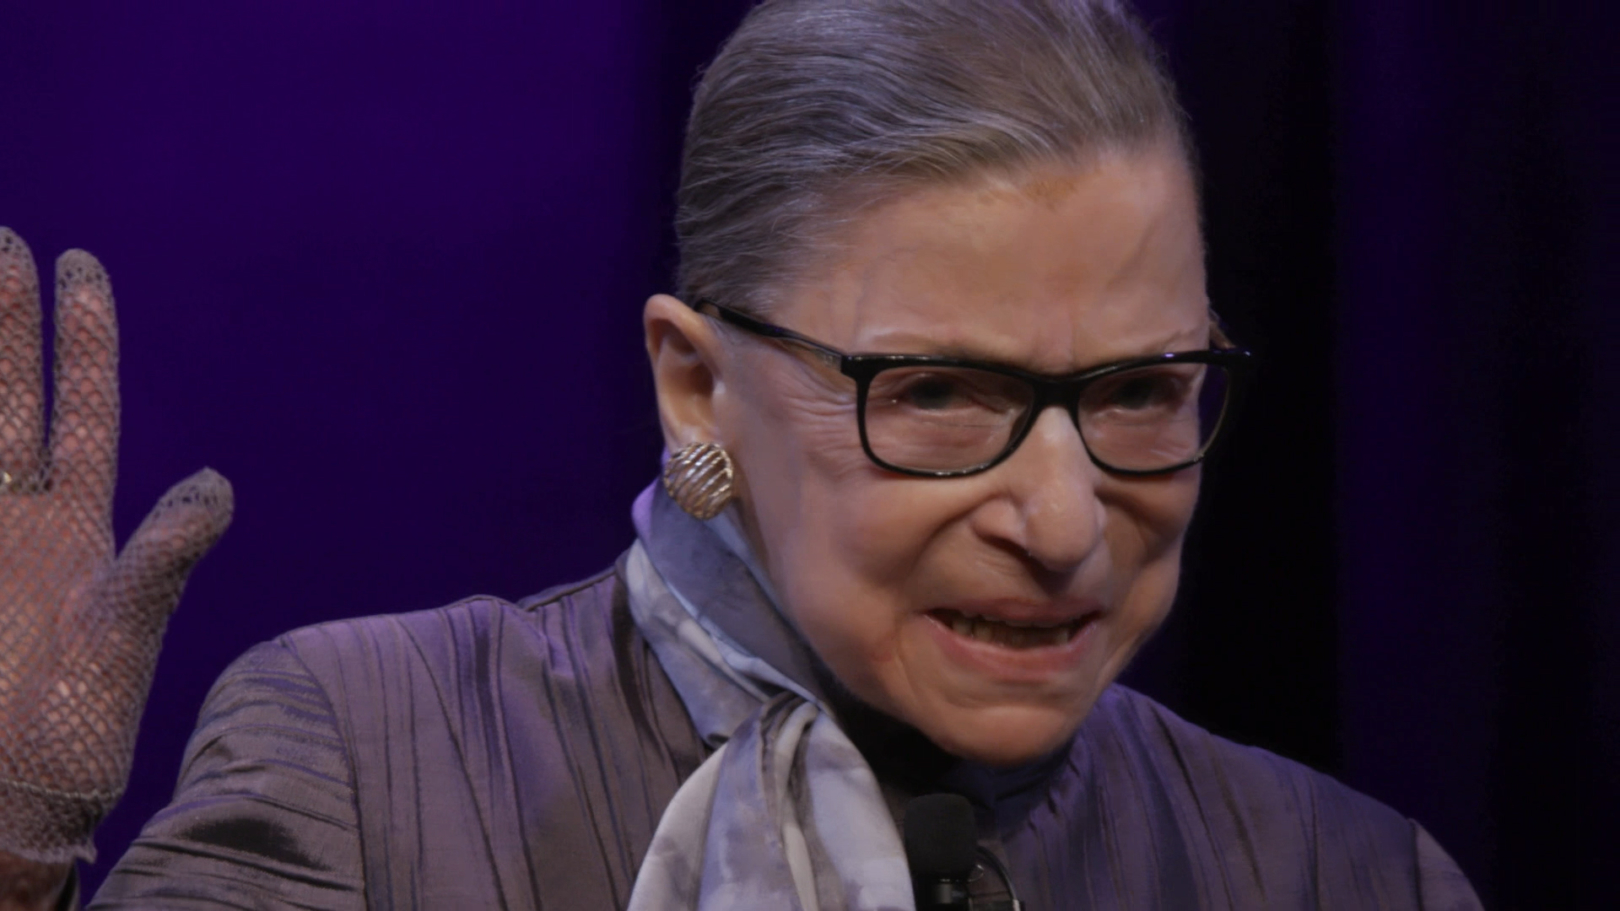 U.S. Supreme Court Justice Ruth Bader Ginsburg in RBG, directed by Betsy West and Julie Cohen. Courtesy of CNN Films.